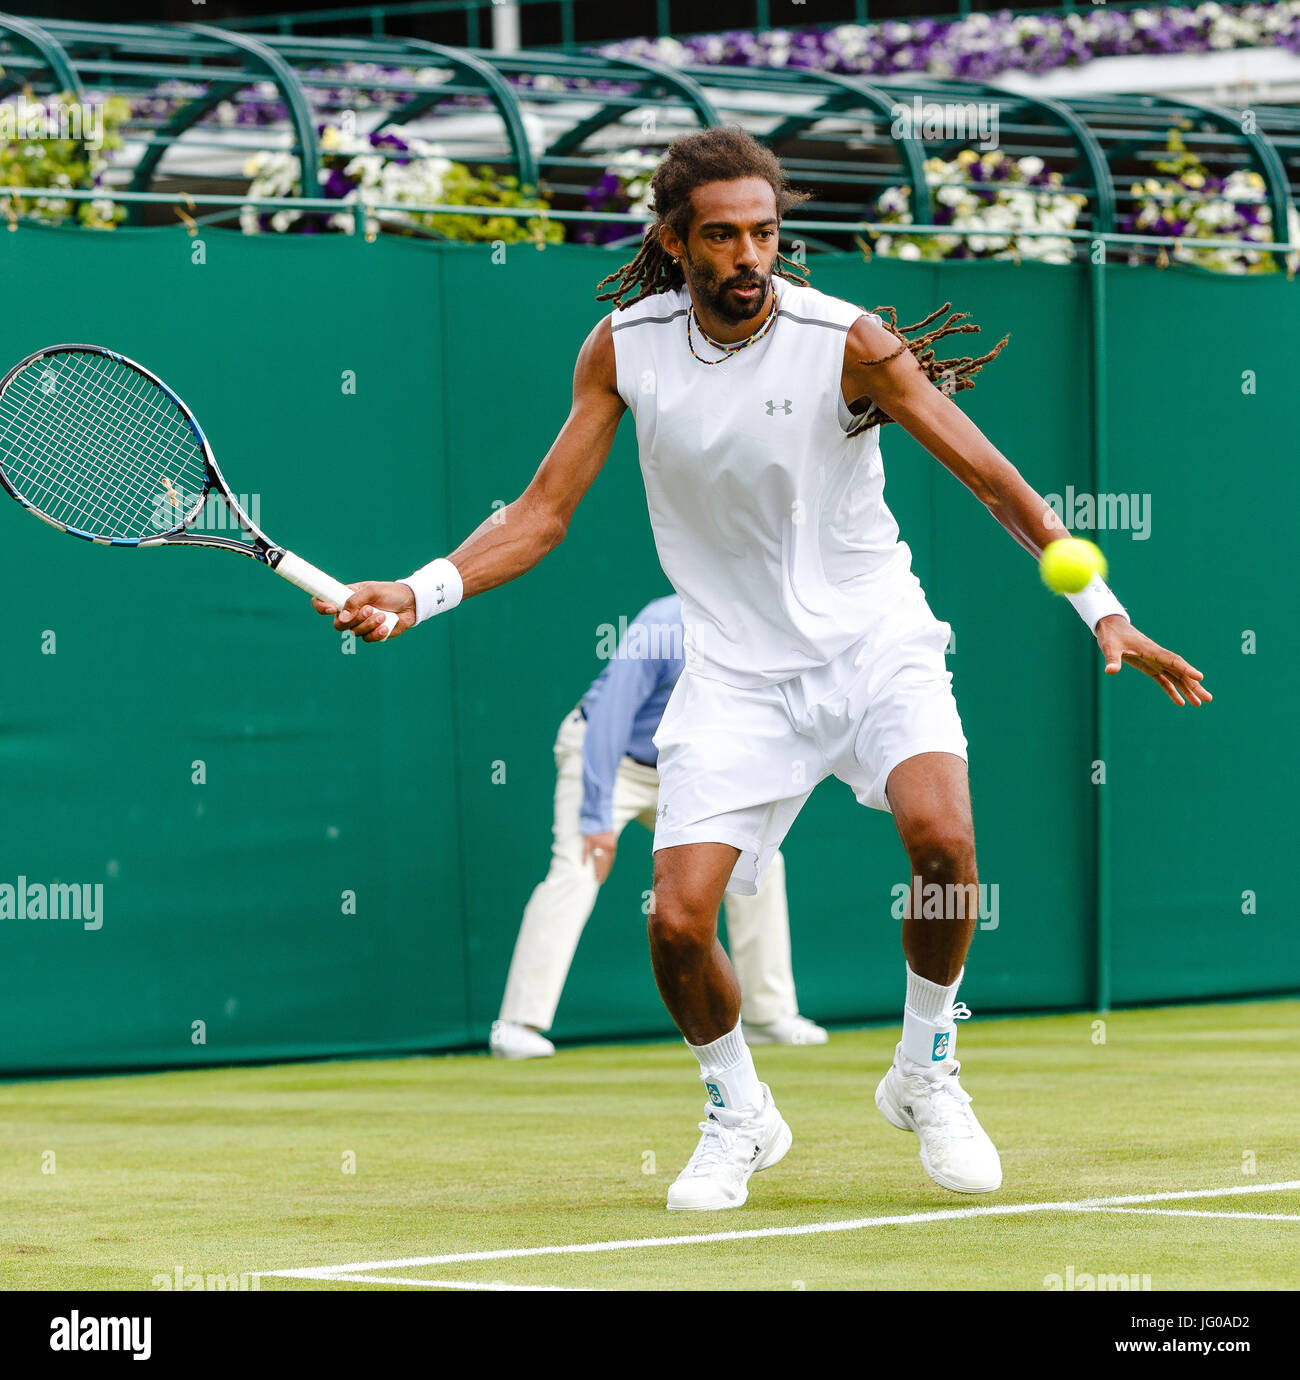 London, UK. 3rd July, 2017. German tennis player Dustin Brown in action  during his 1st round match at the Wimbledon Tennis Championships 2017 at  the All England Lawn Tennis and Croquet Club